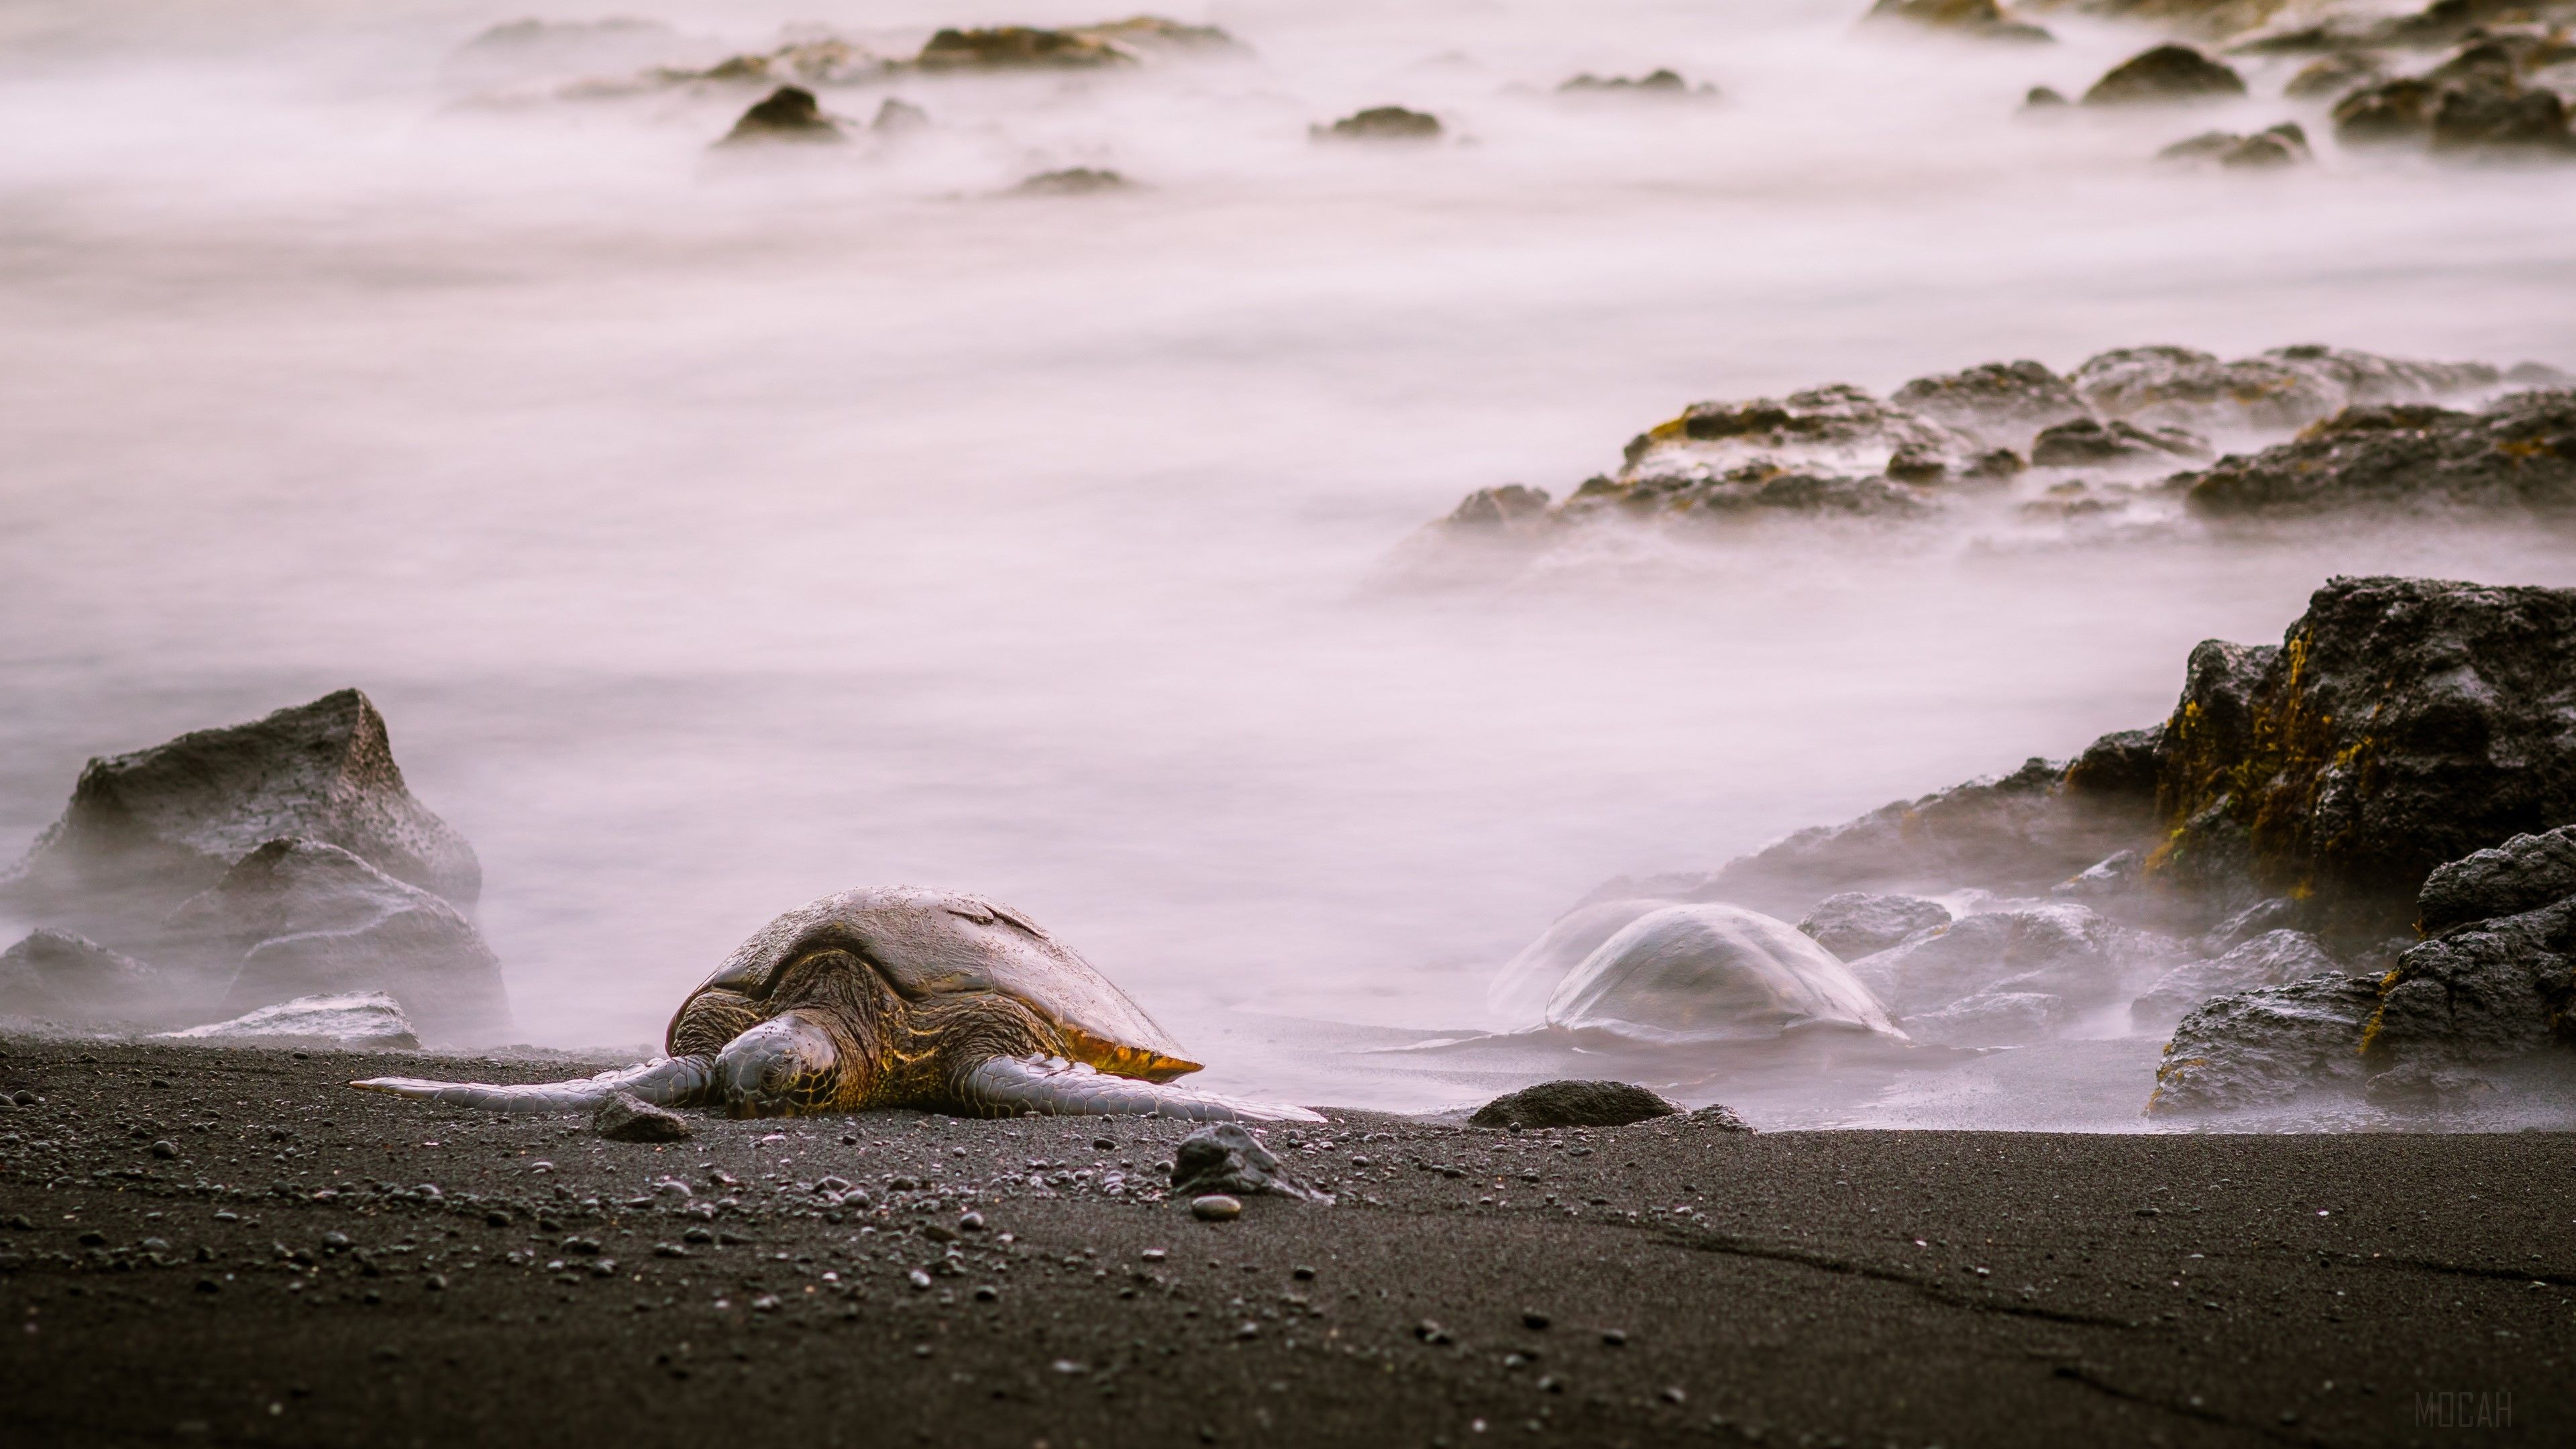 A turtle is laying on the beach - Sea turtle, turtle